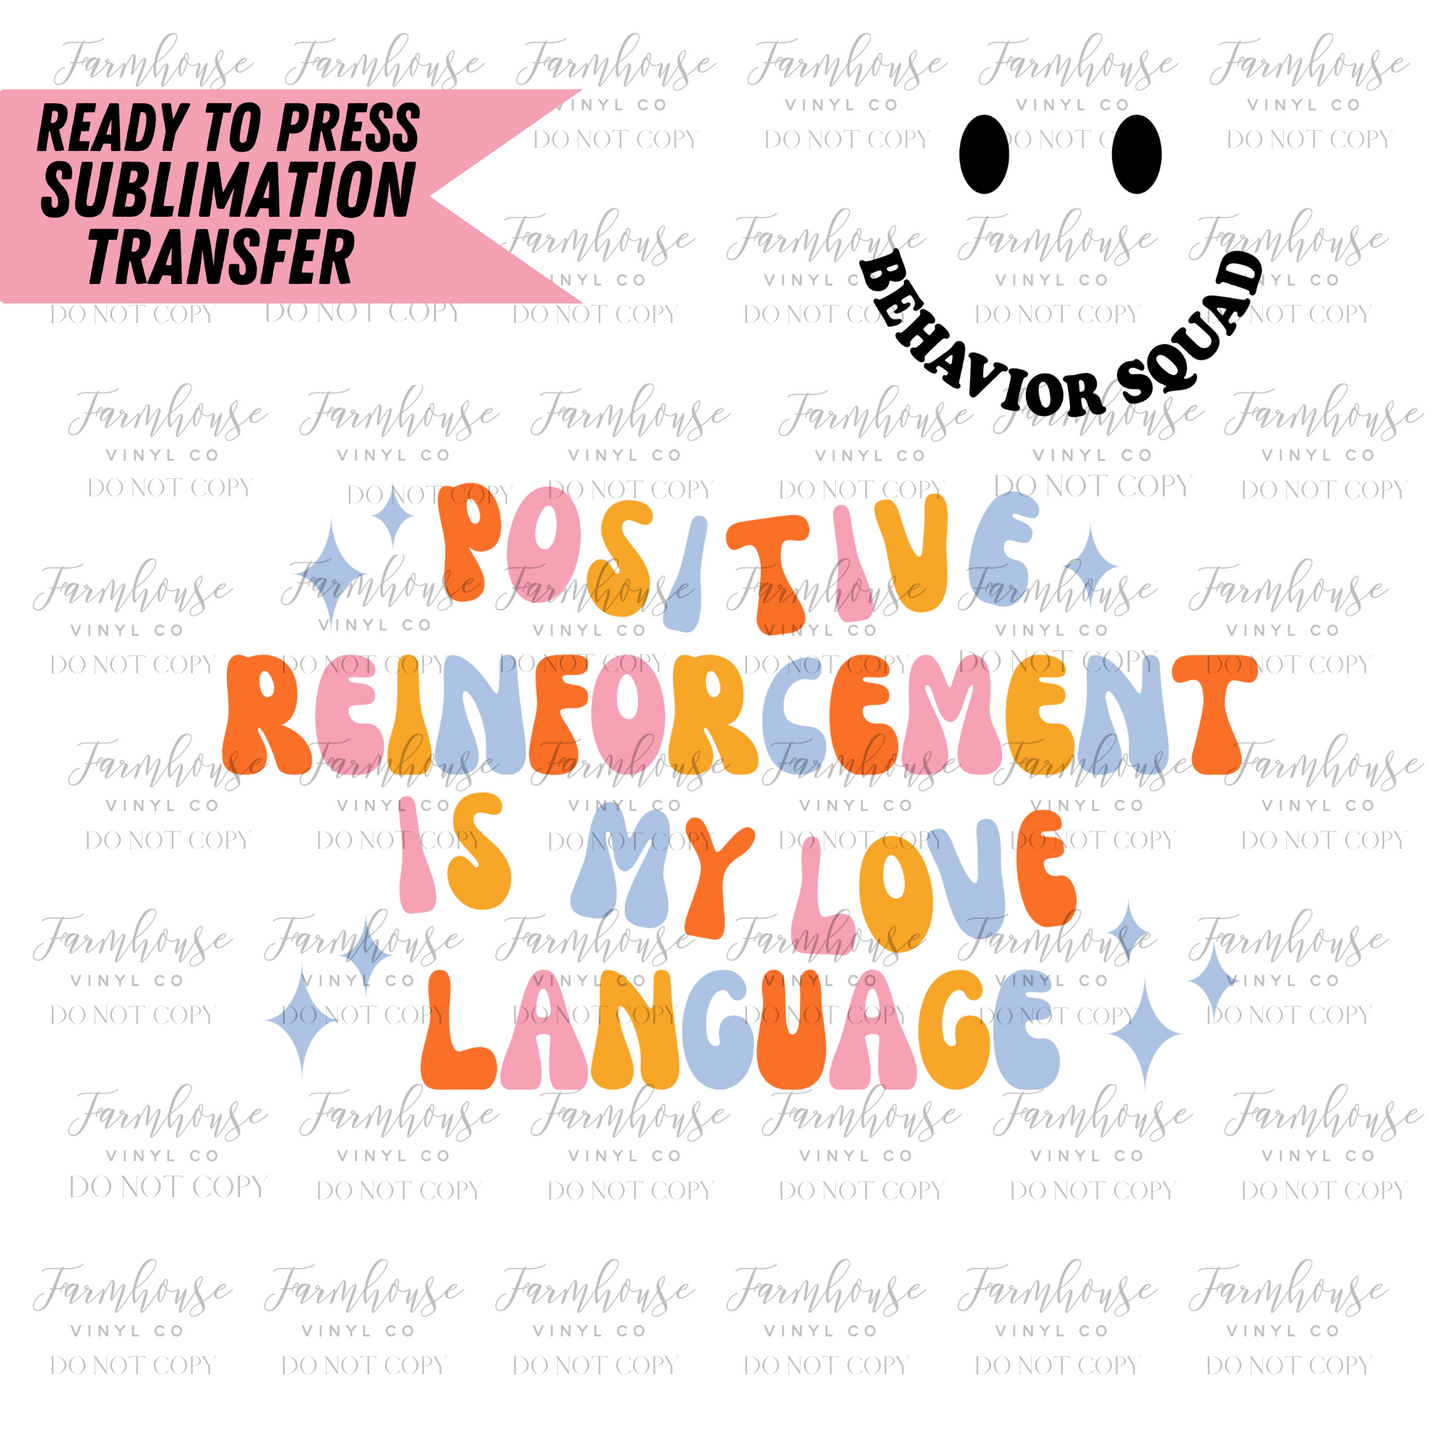 Positive Reinforcement Is My Love Language Ready To Press Sublimation Transfer